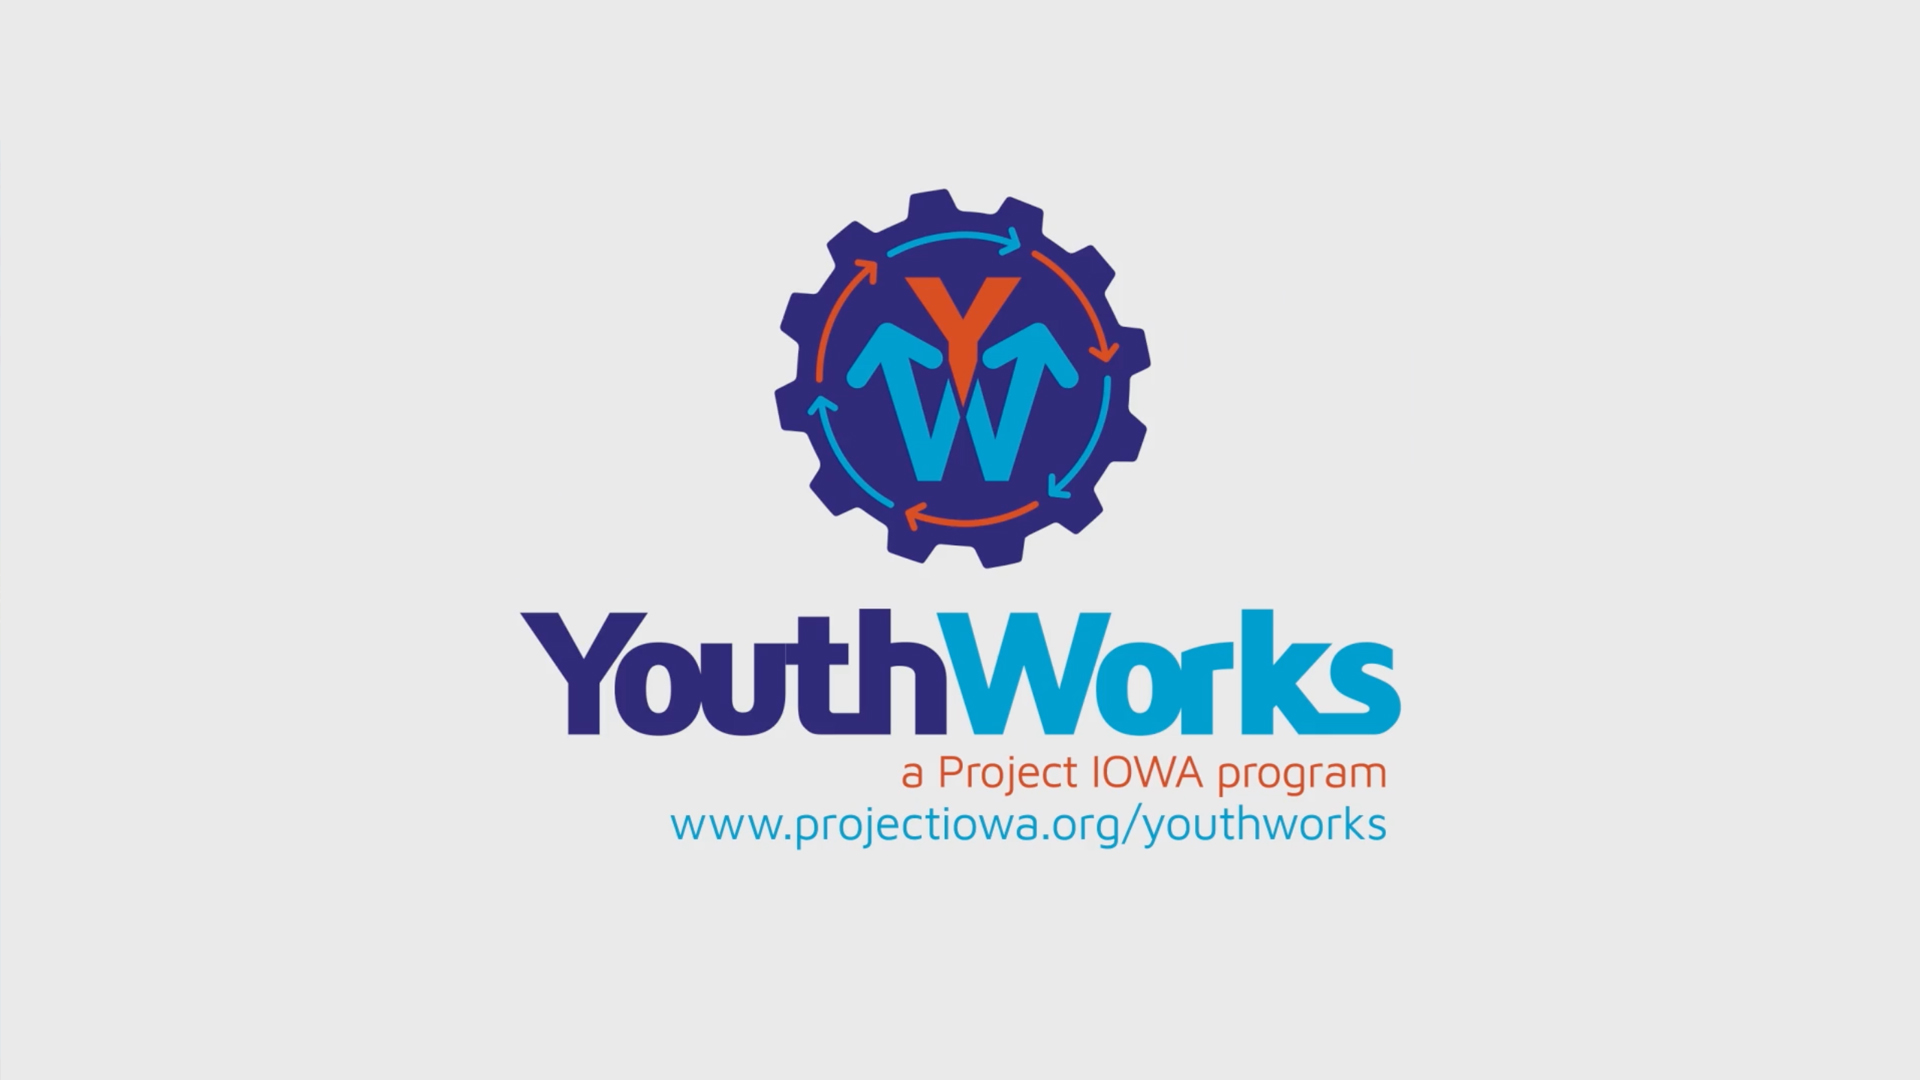 The YouthWorks logo on a white background along with the text “a Project IOWA program, www.projectiowa.org/youthworks.”